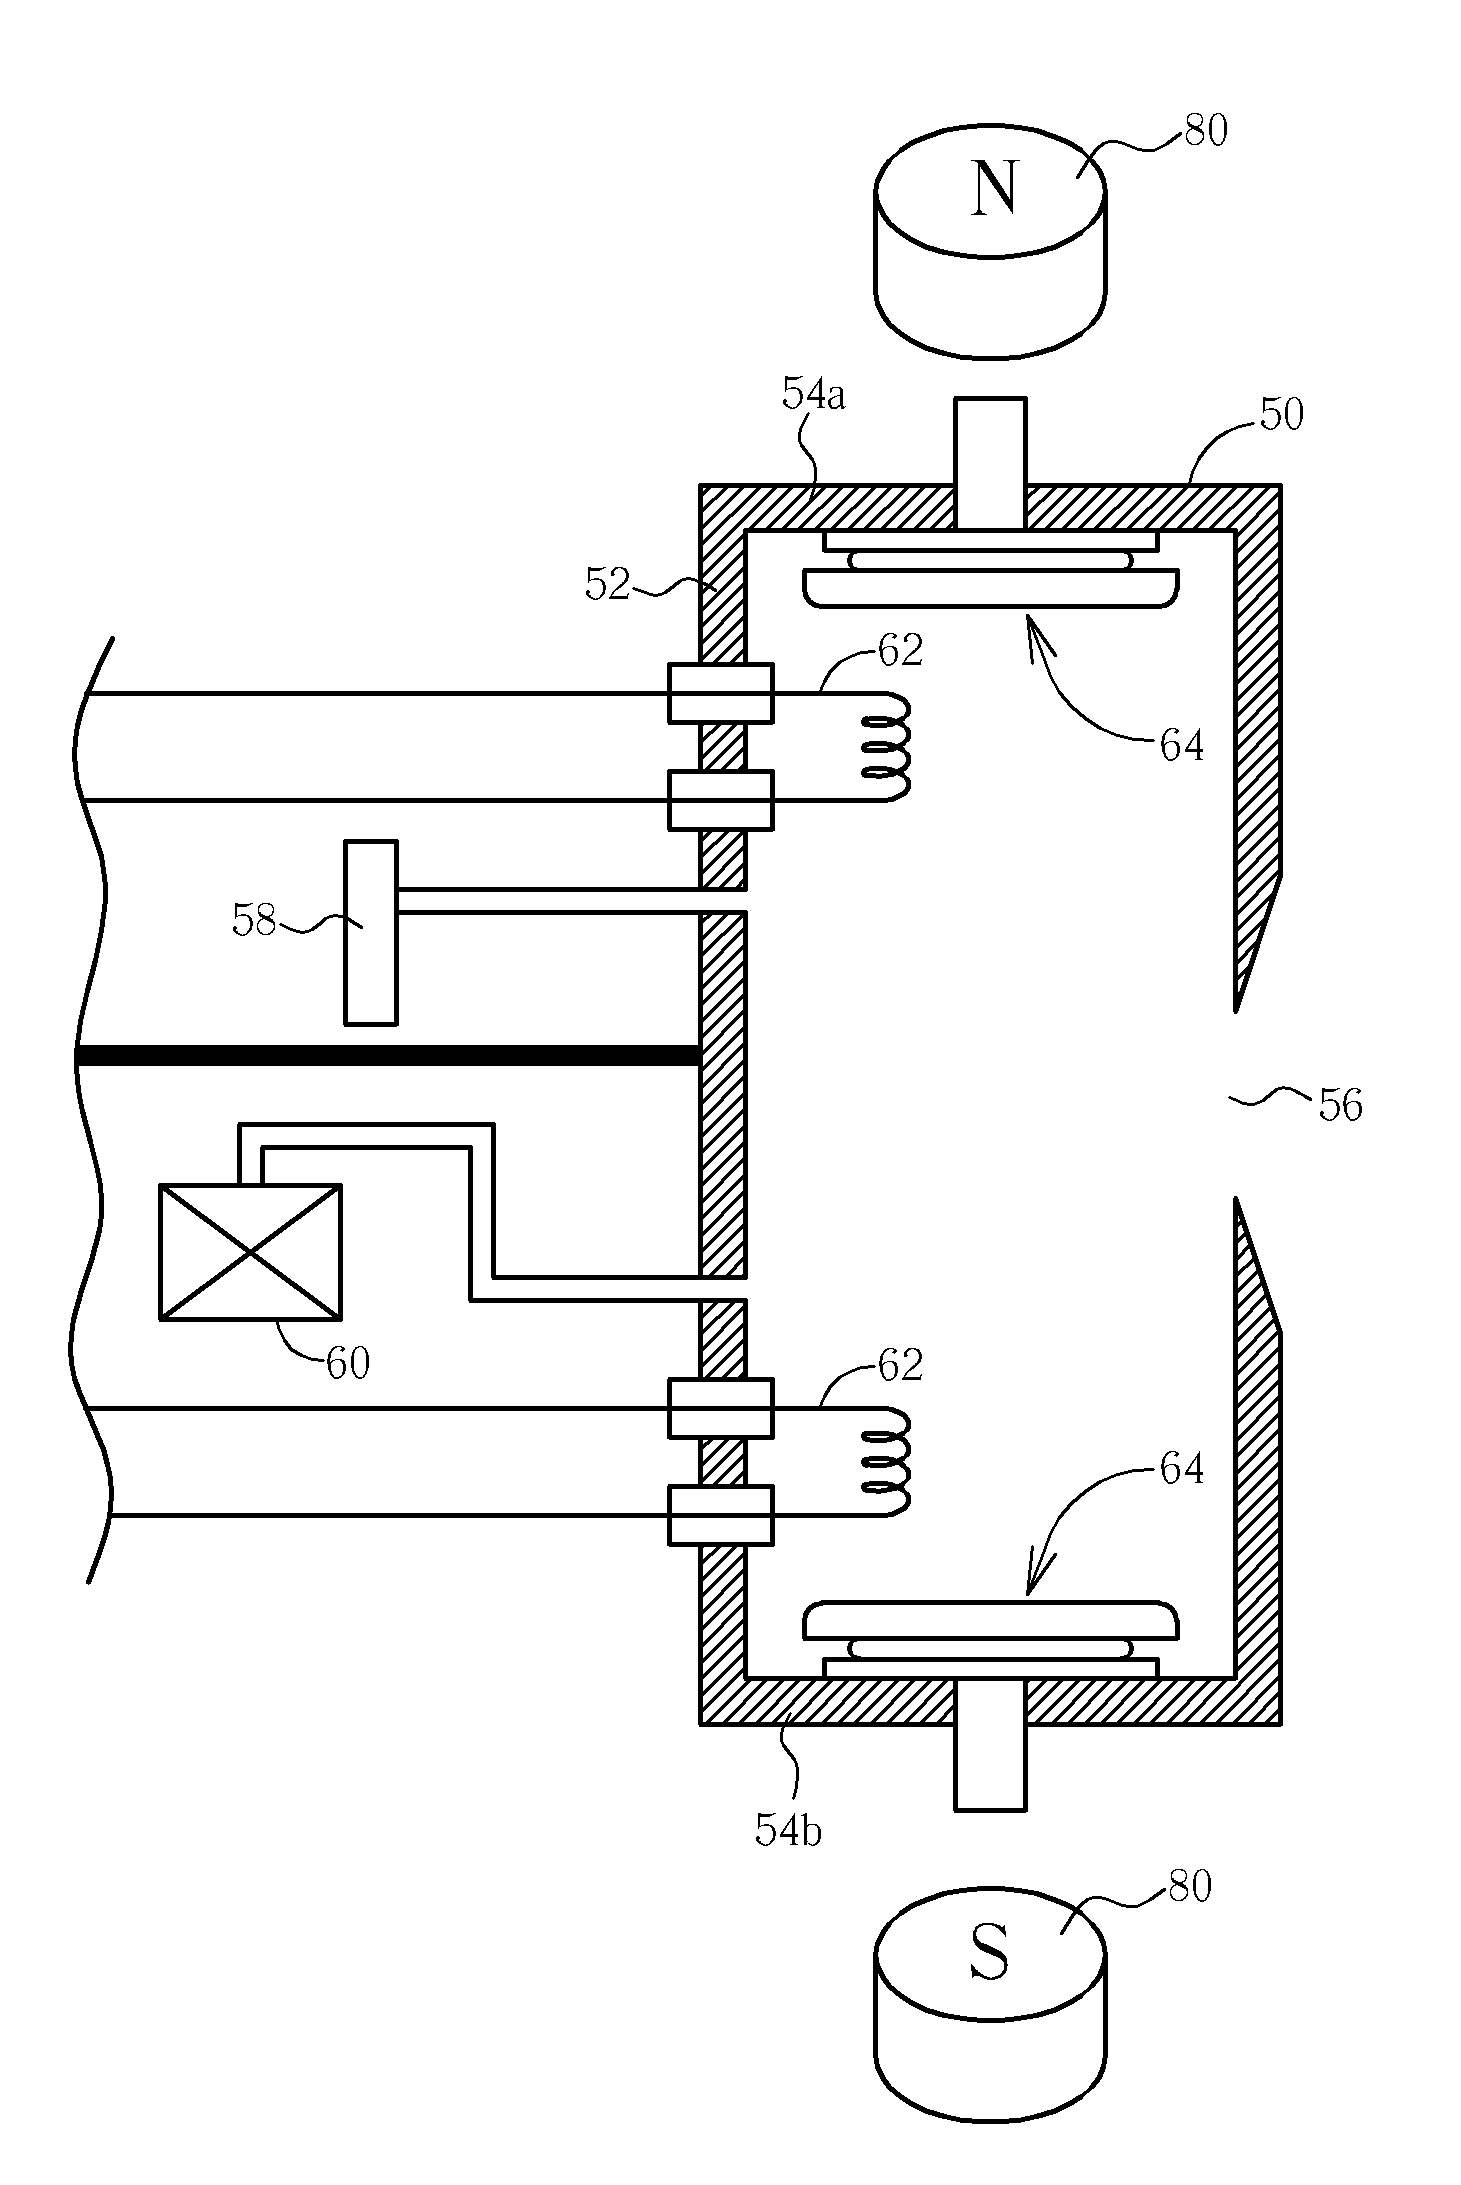 Arc chamber for an ion implantation system